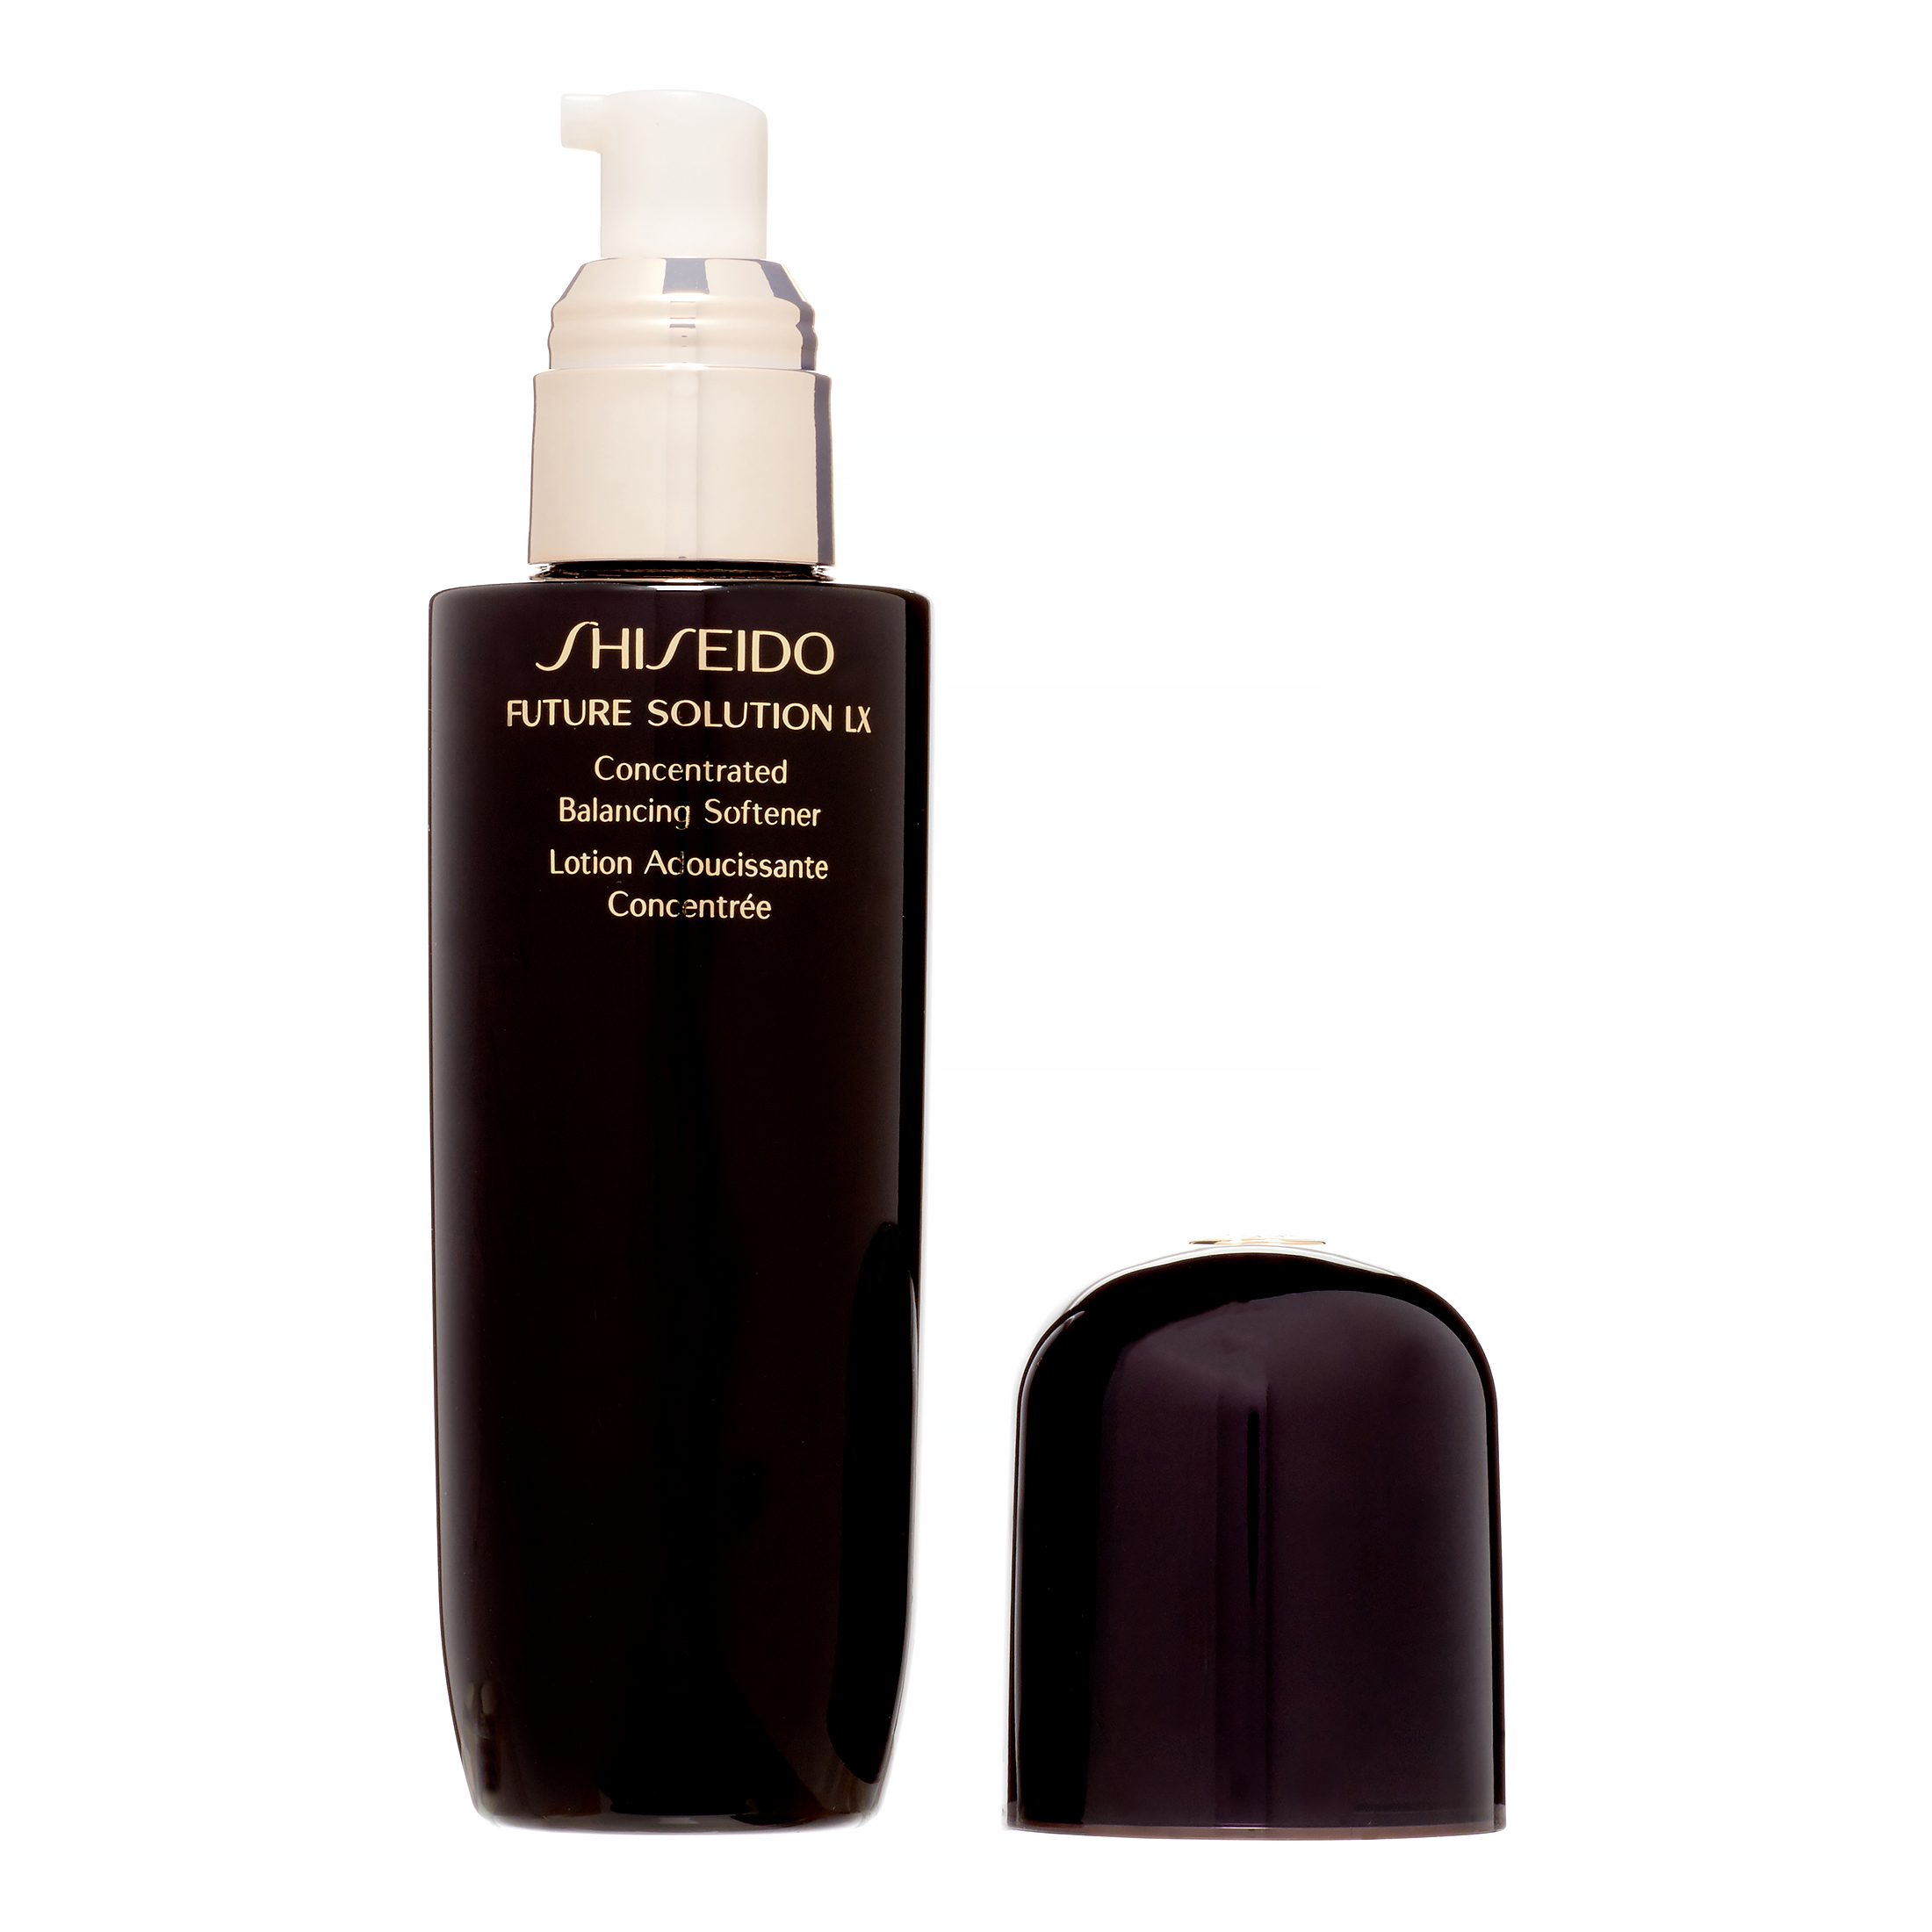 Shiseido Future Solution LX Concentrated Balancing Softener Face Lotion, 5 oz - image 3 of 11